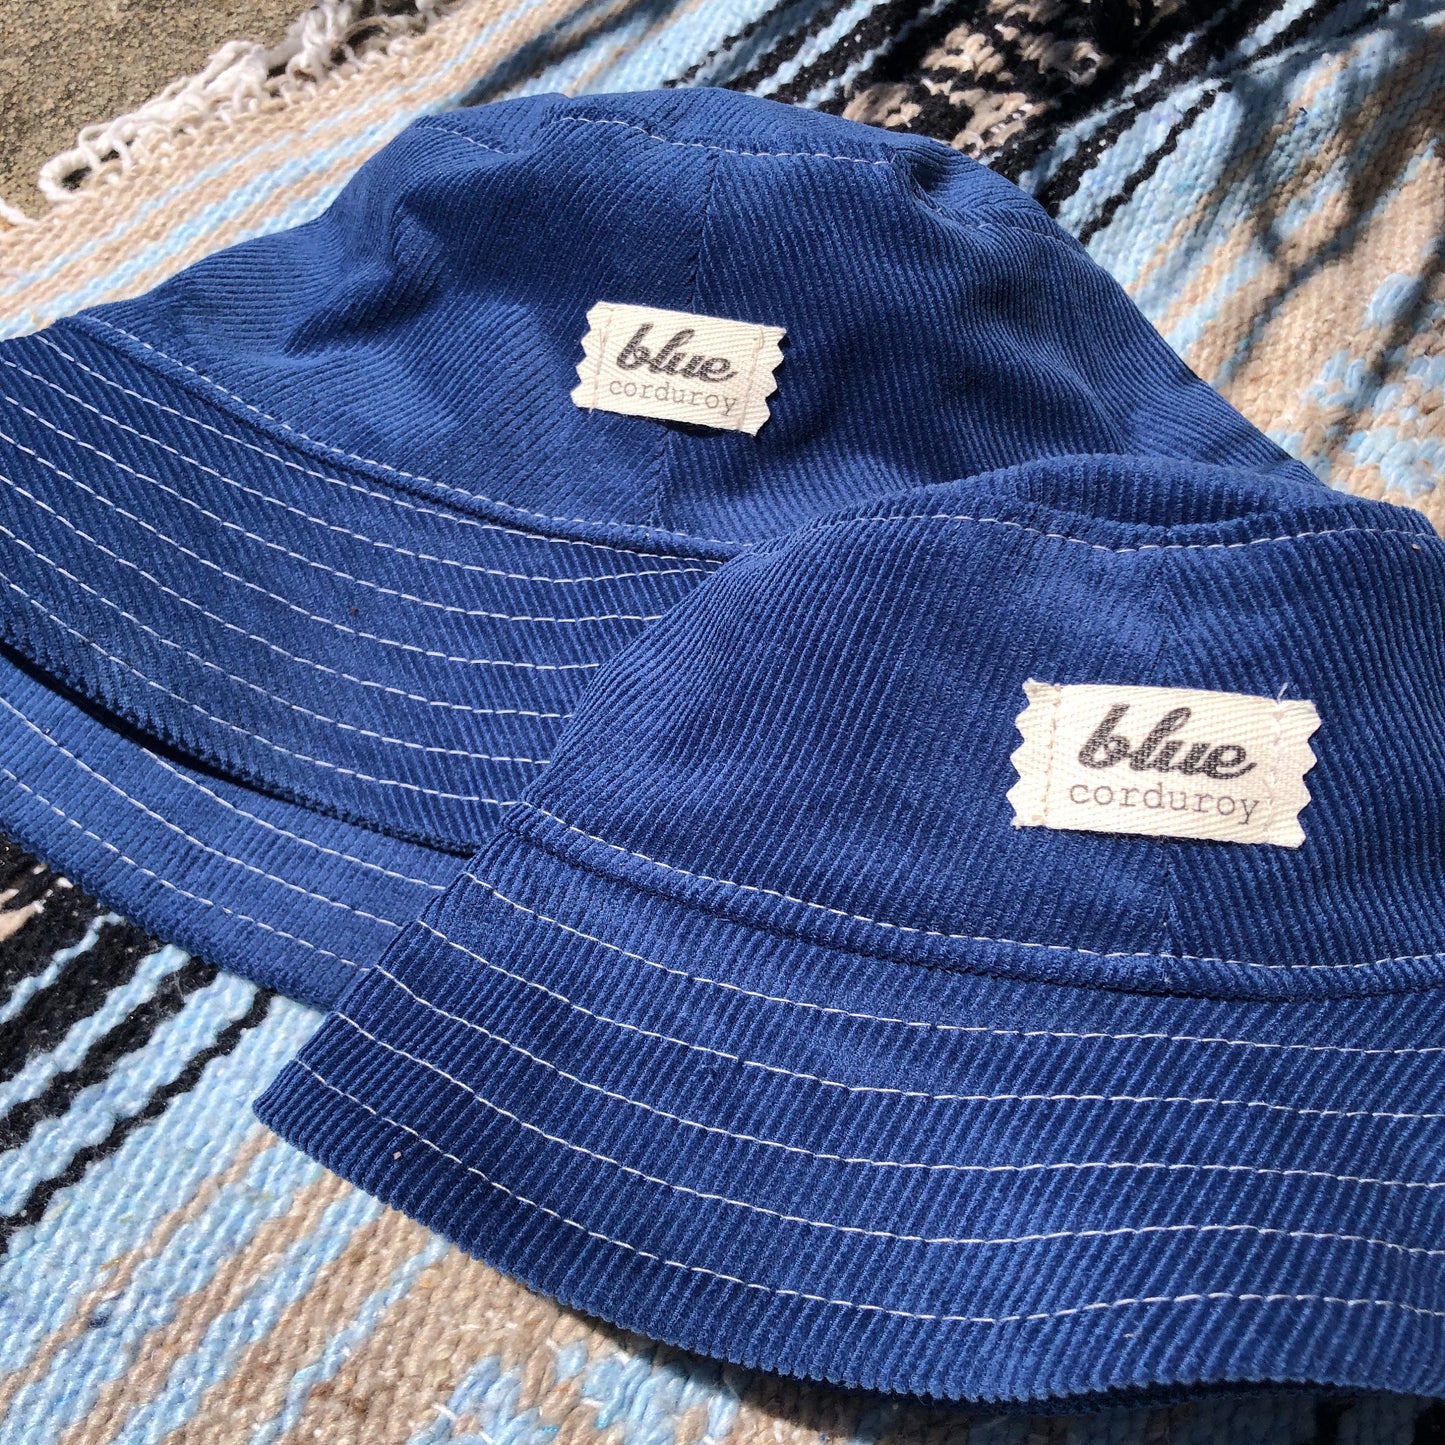 Family Bucket Hats, Mommy and Me Matching Hats, Blue Corduroy Hat, Family Beach Day Accessories, Newborn Shower Gift, Dad and Son Sun Hats